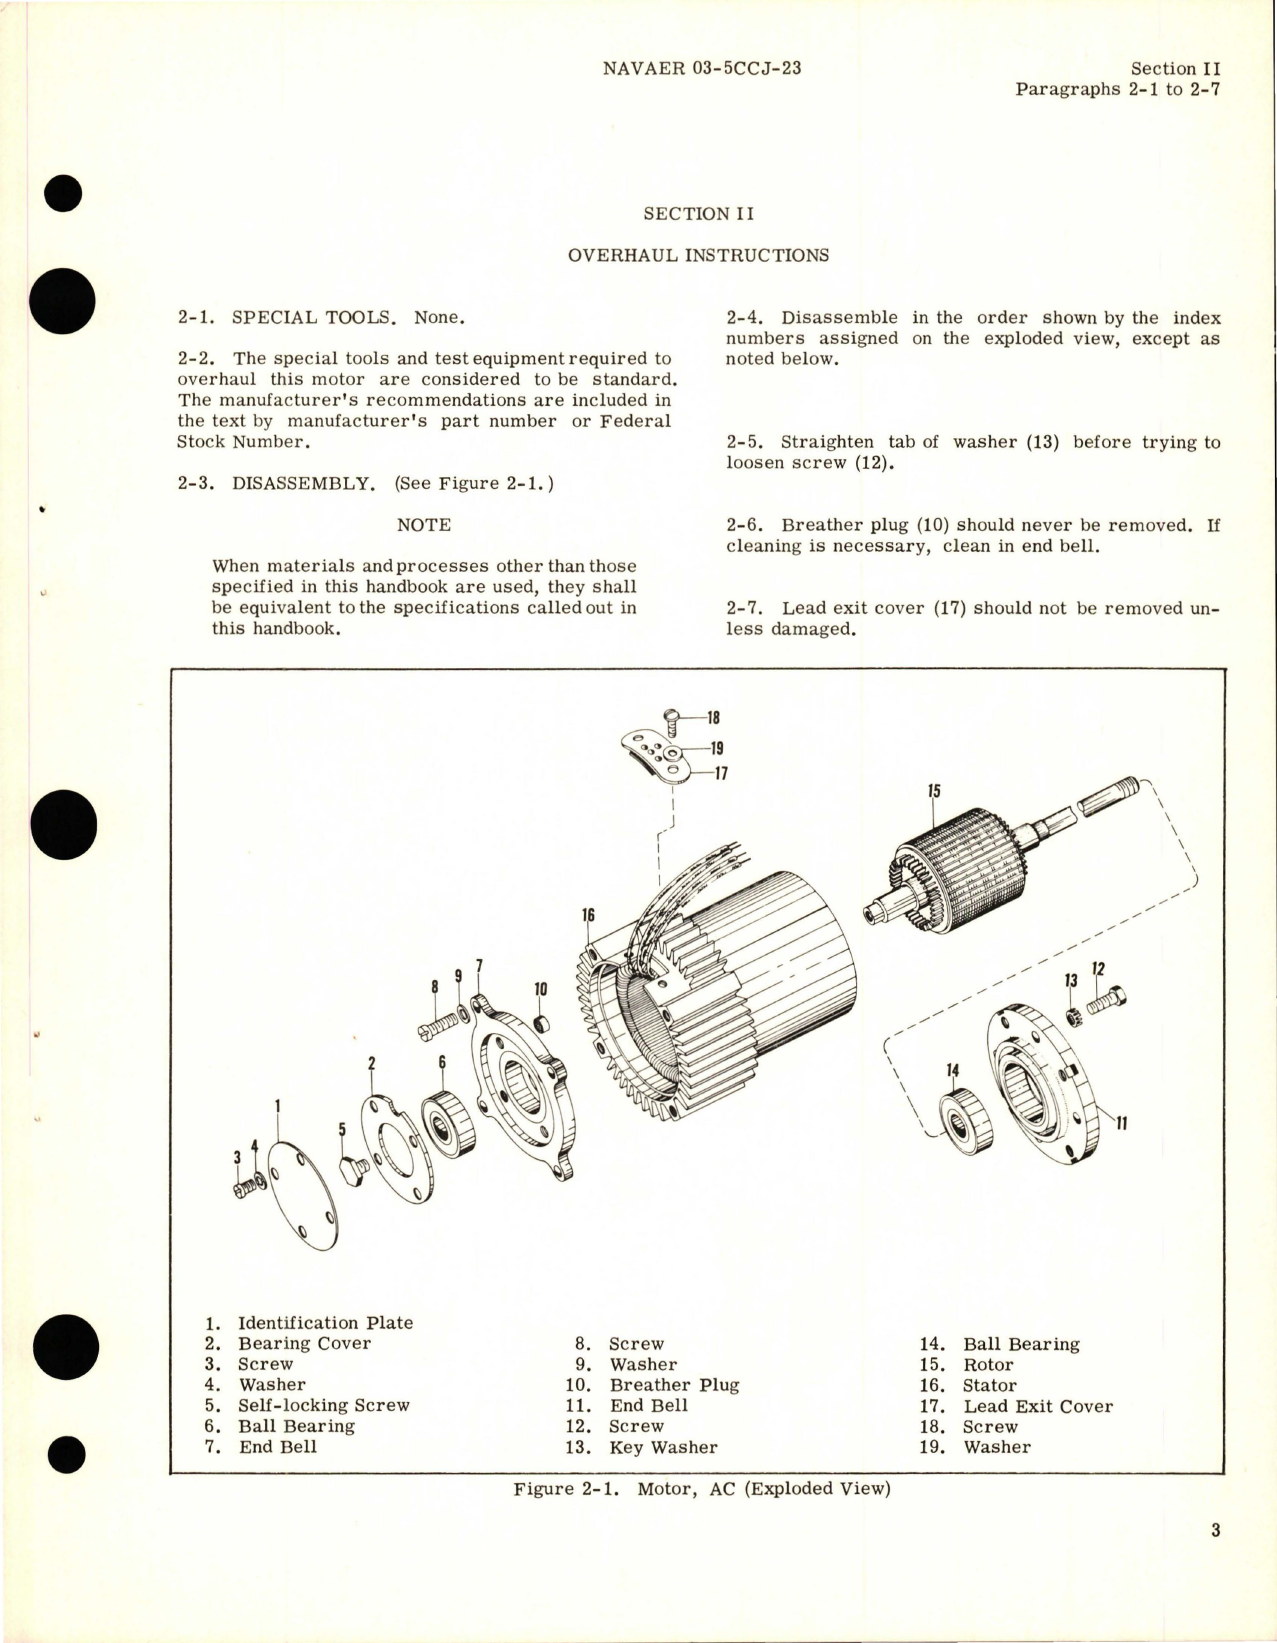 Sample page 7 from AirCorps Library document: Overhaul Instructions for AC Motor - Part 906D084-1